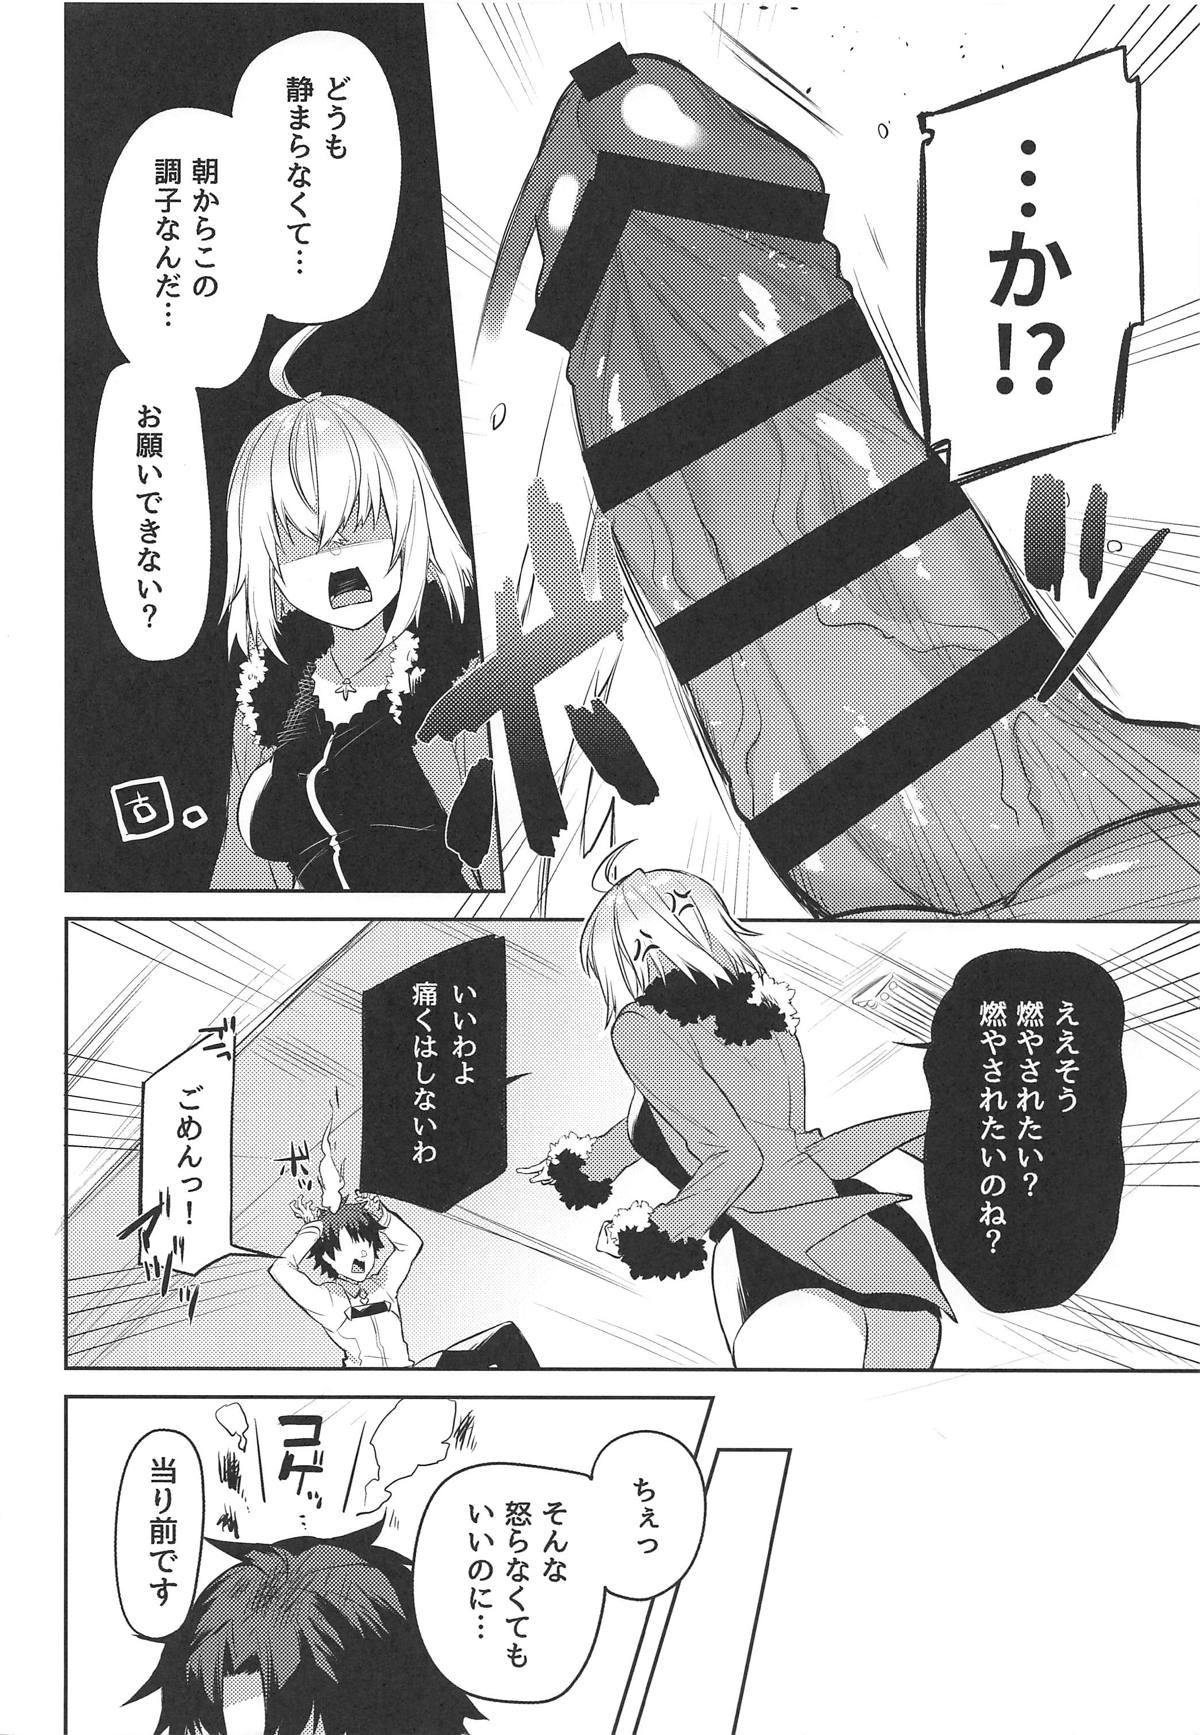 Shavedpussy Shinjuku Sneaking Mission - Fate grand order Balls - Page 3